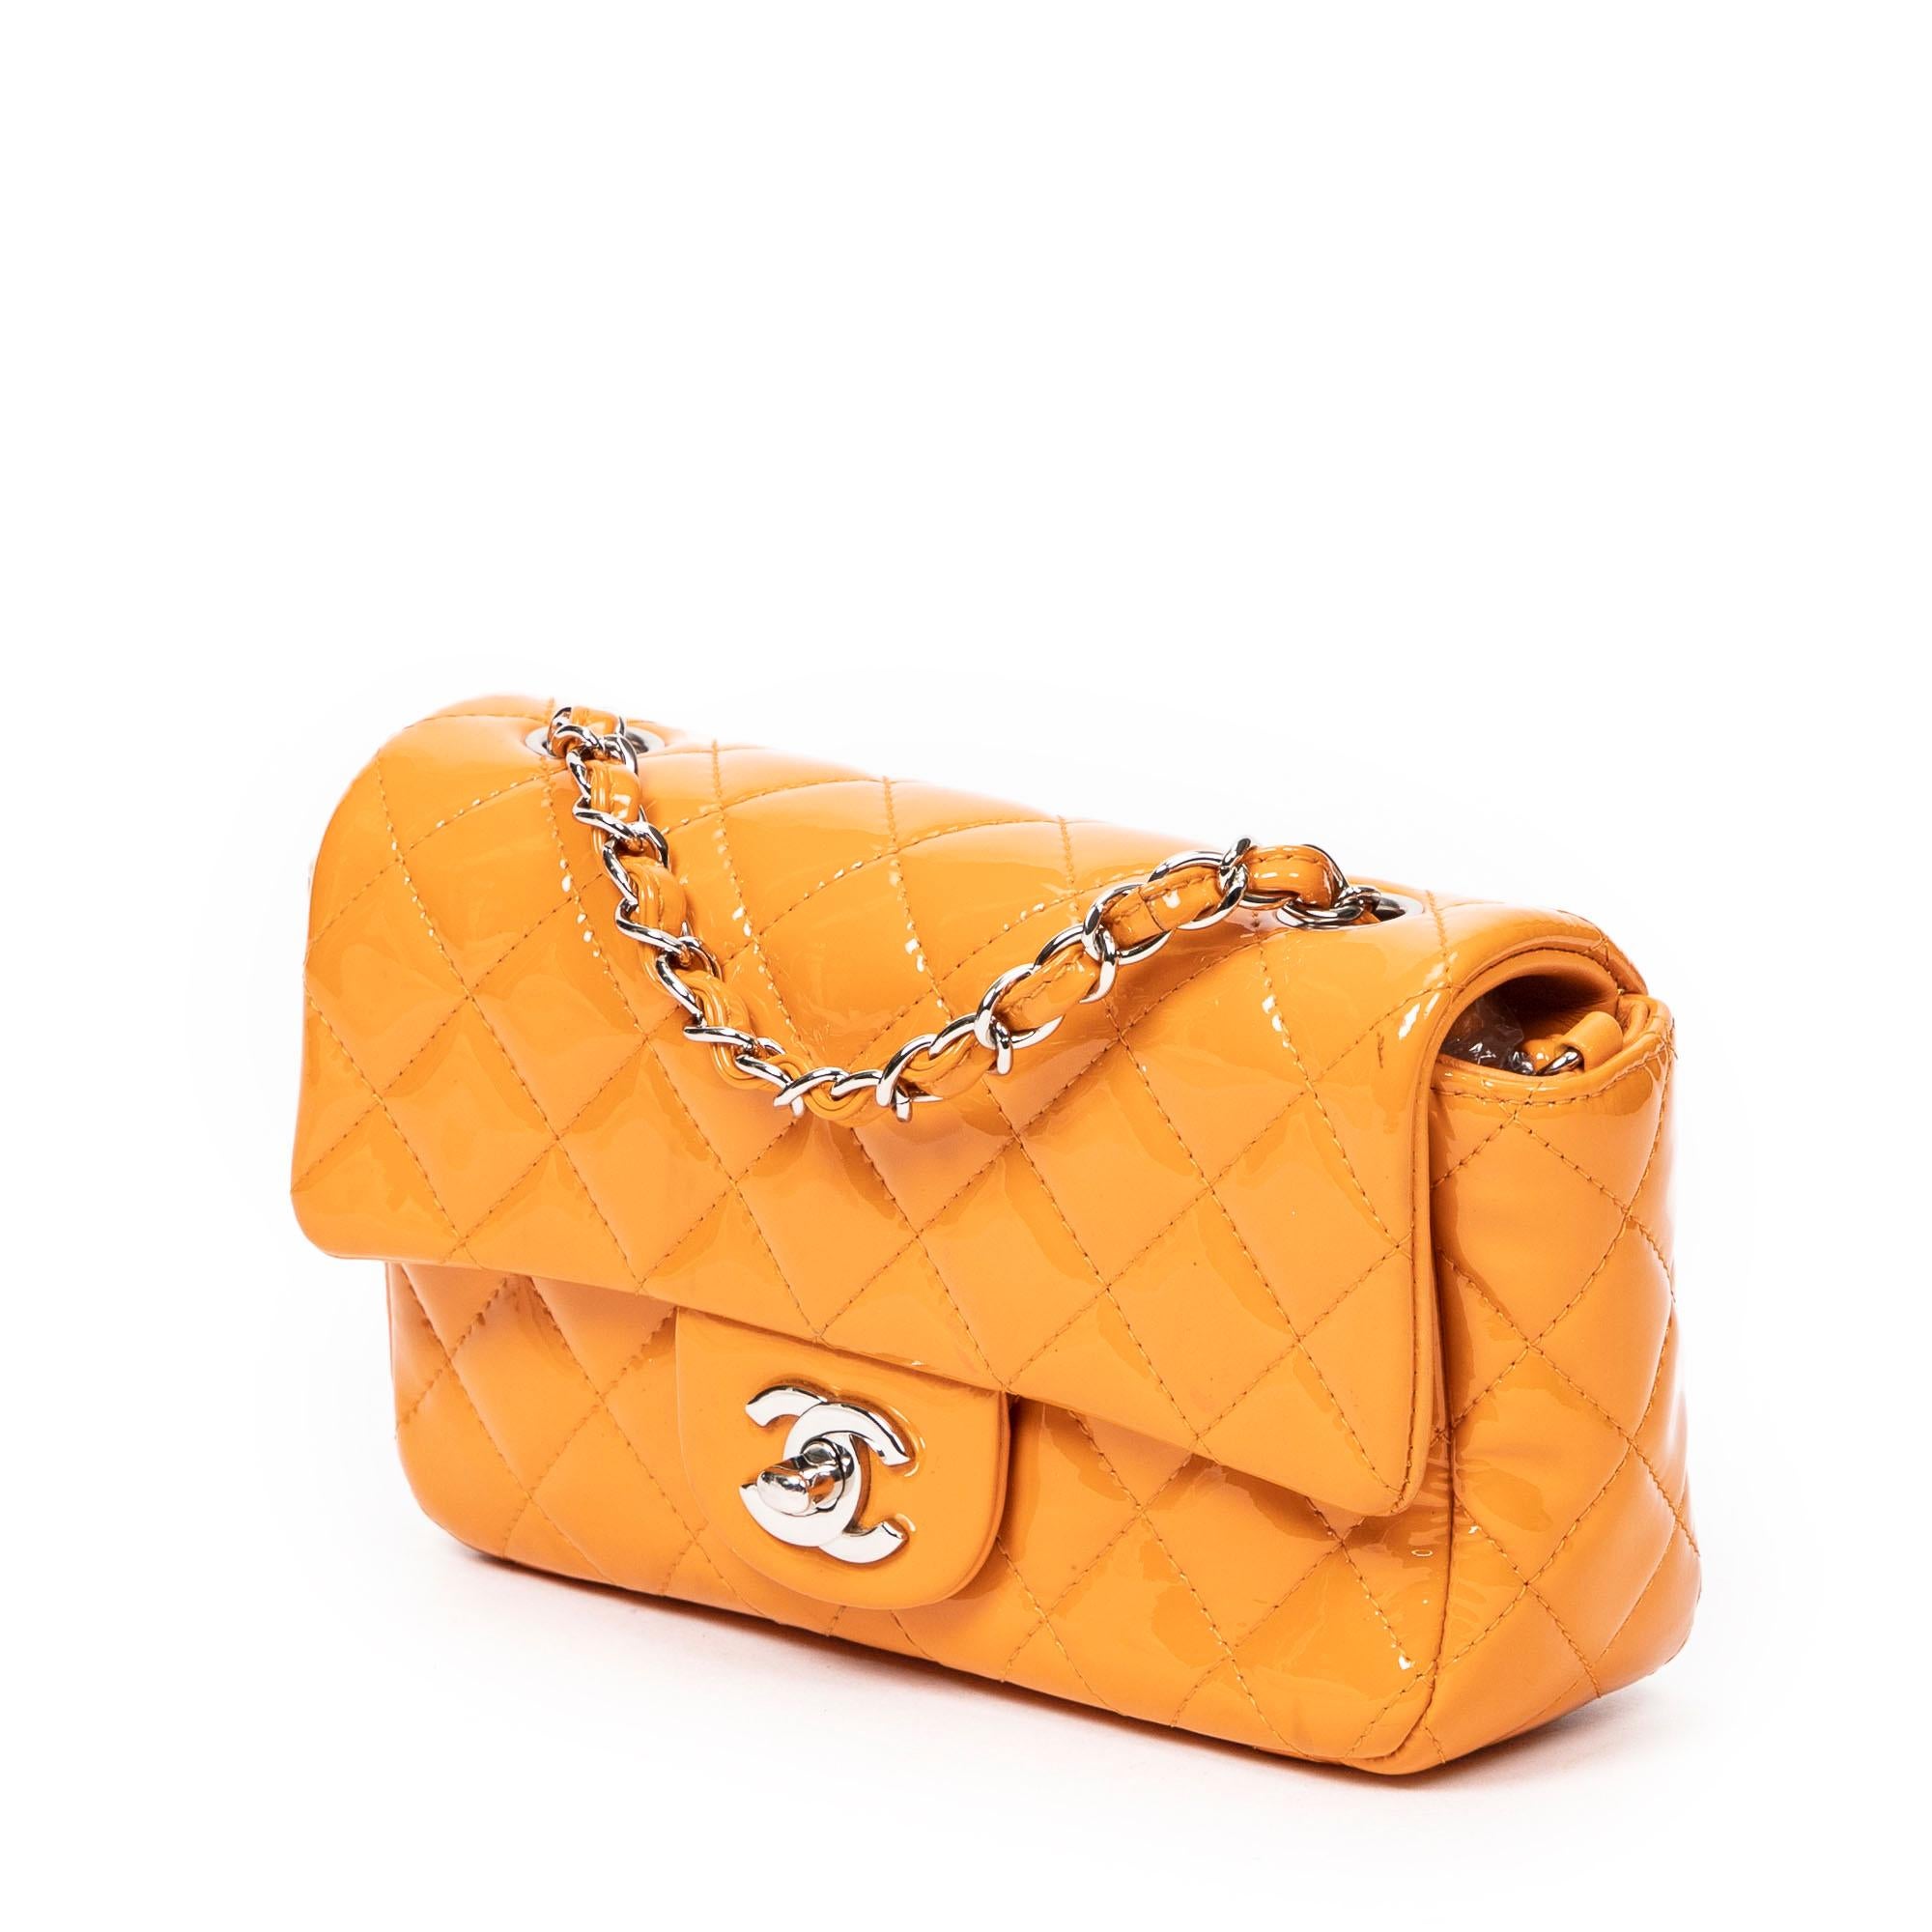 Chanel's 2014 Mini Single Flap Bag in vibrant orange quilted patent leather features a signature silver CC turnlock and a luxurious leather interior complete with pockets.

SPECIFICS
• Length: 7.5